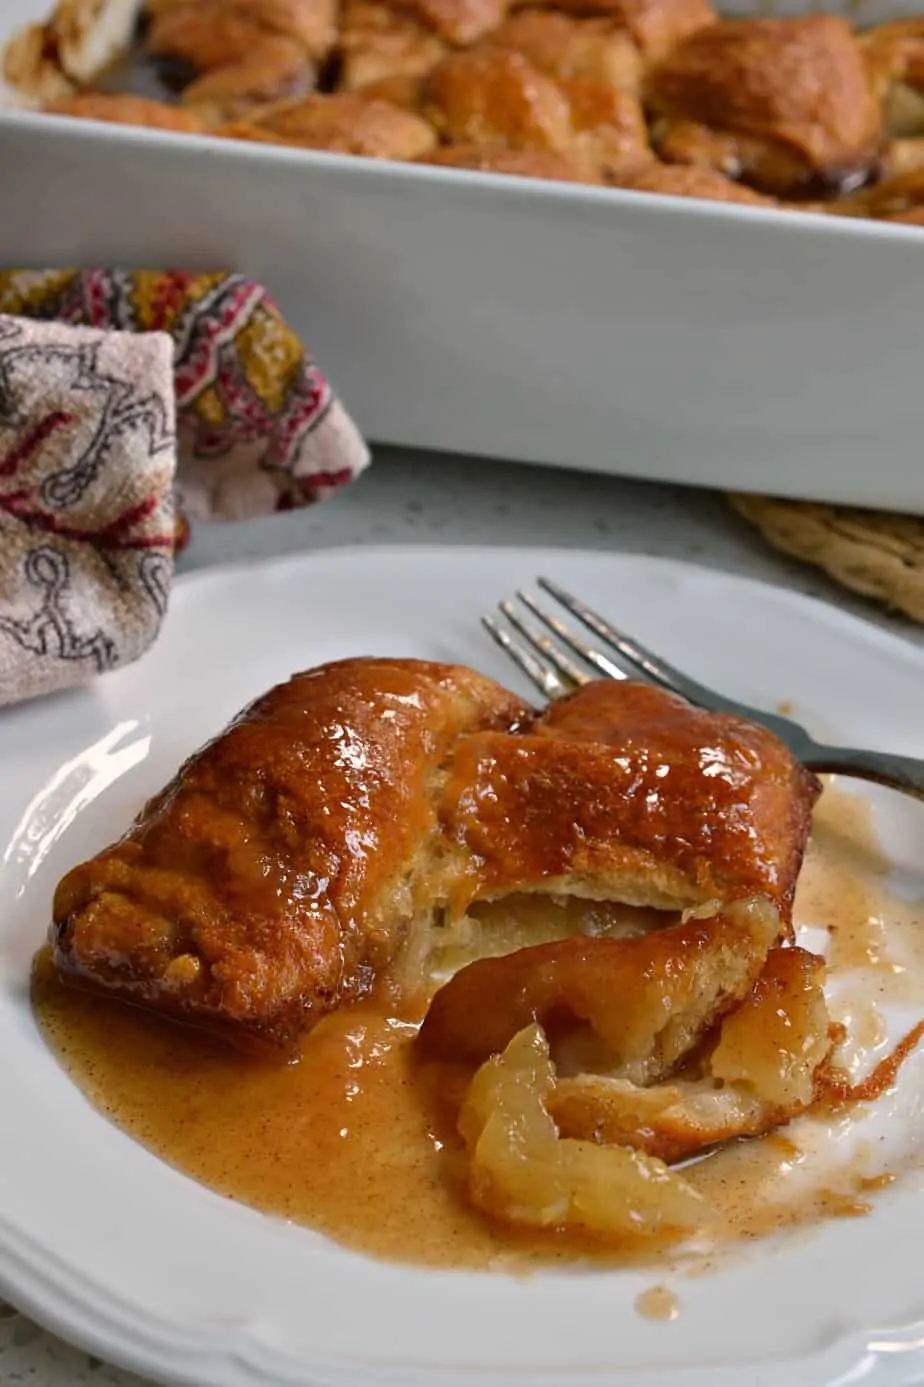 These scrumptious Apple Dumplings have apple slices rolled in dough and baked in butter, brown sugar and cinnamon.